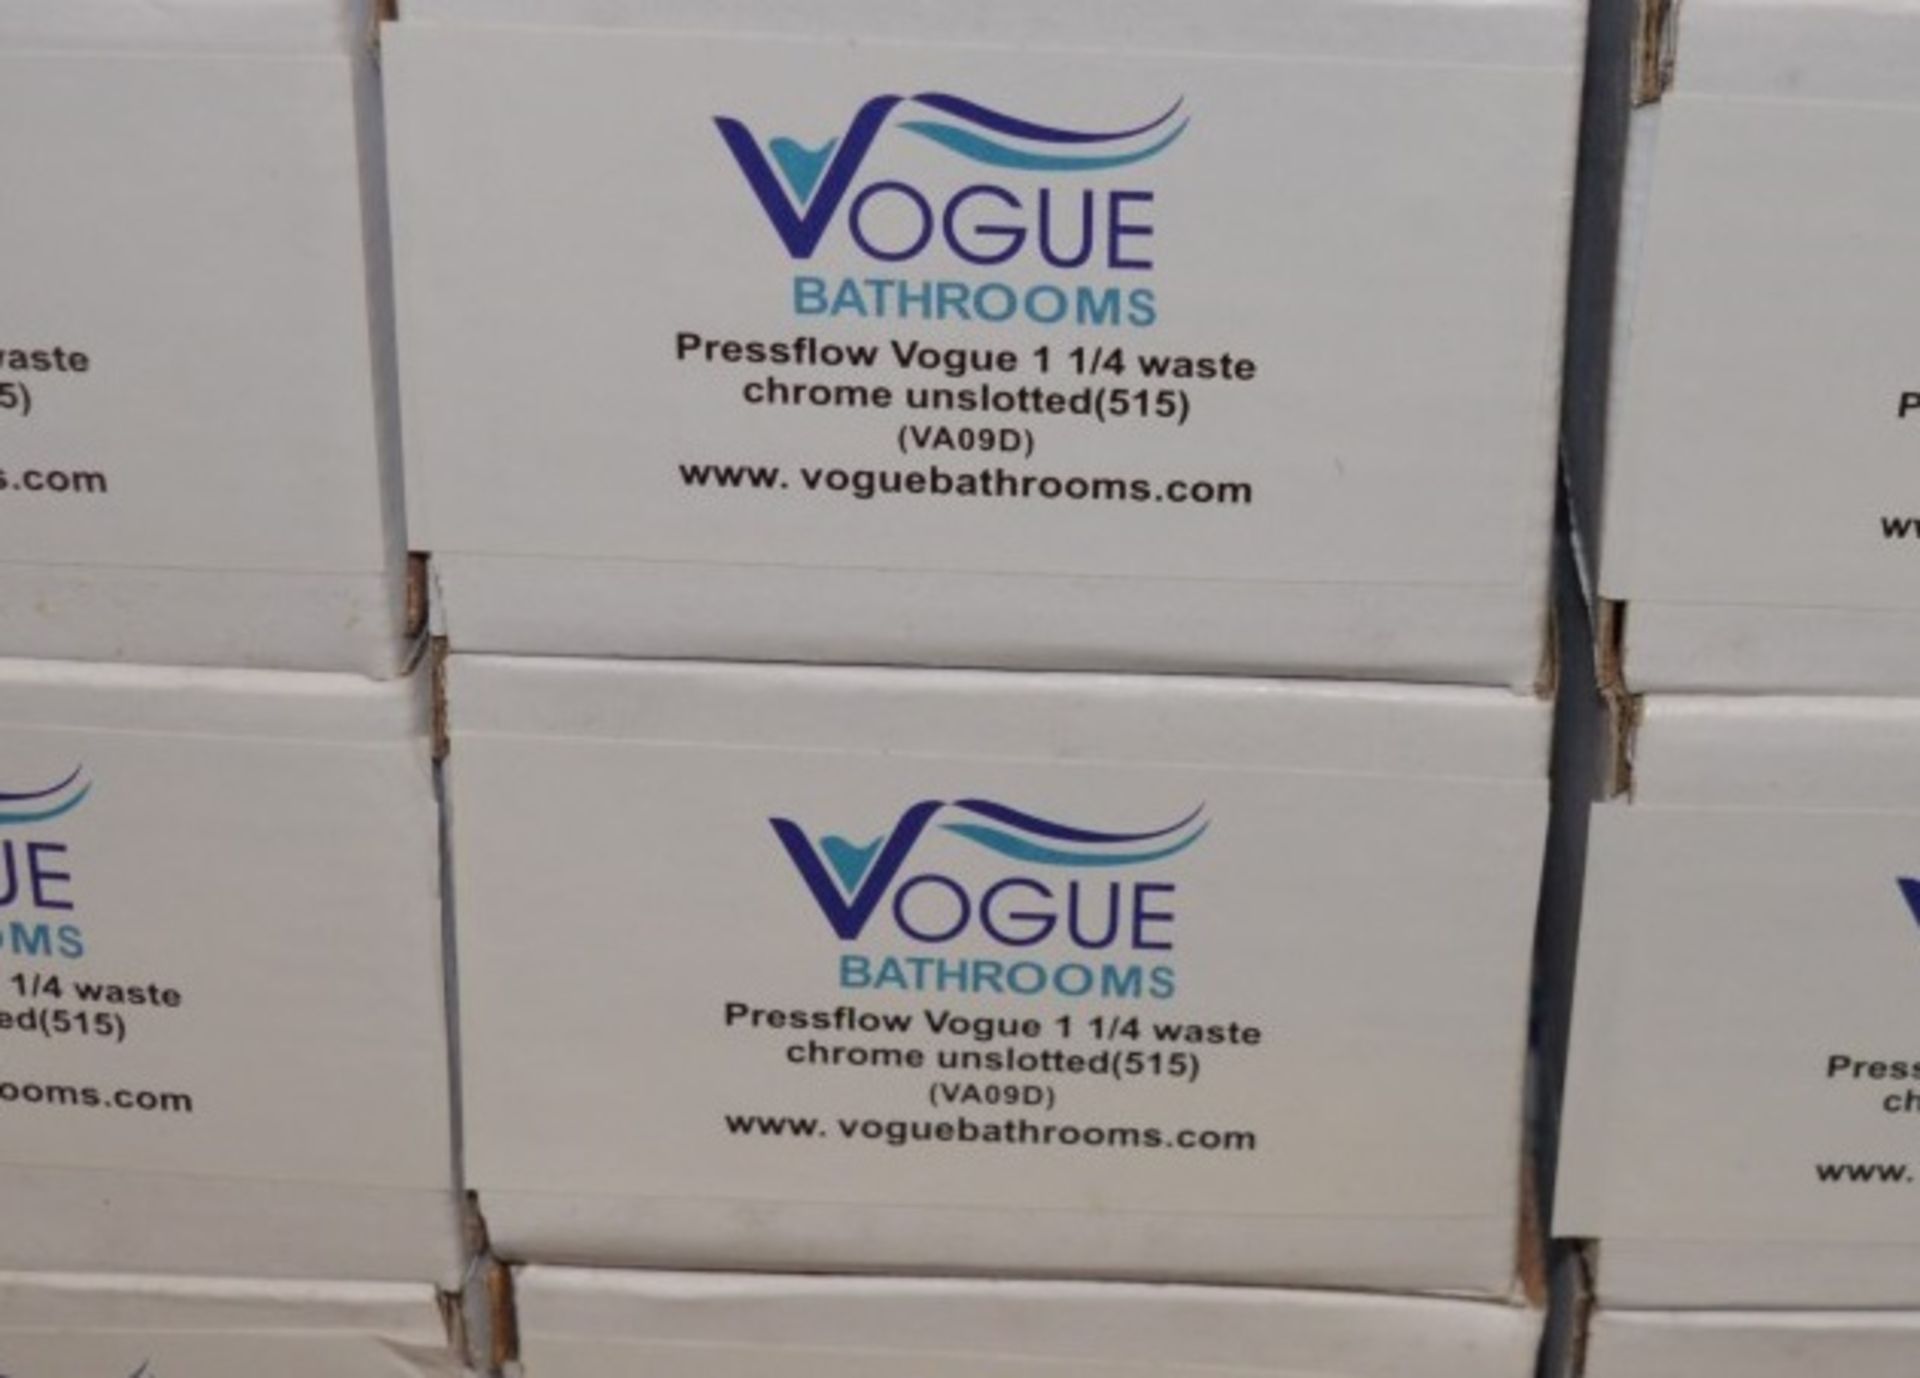 35 x Vogue Bathrooms Pressflow 1 1/4 Unslotted Waste Chrome Waste Fittings - VA09D - Brand New Stock - Image 4 of 5